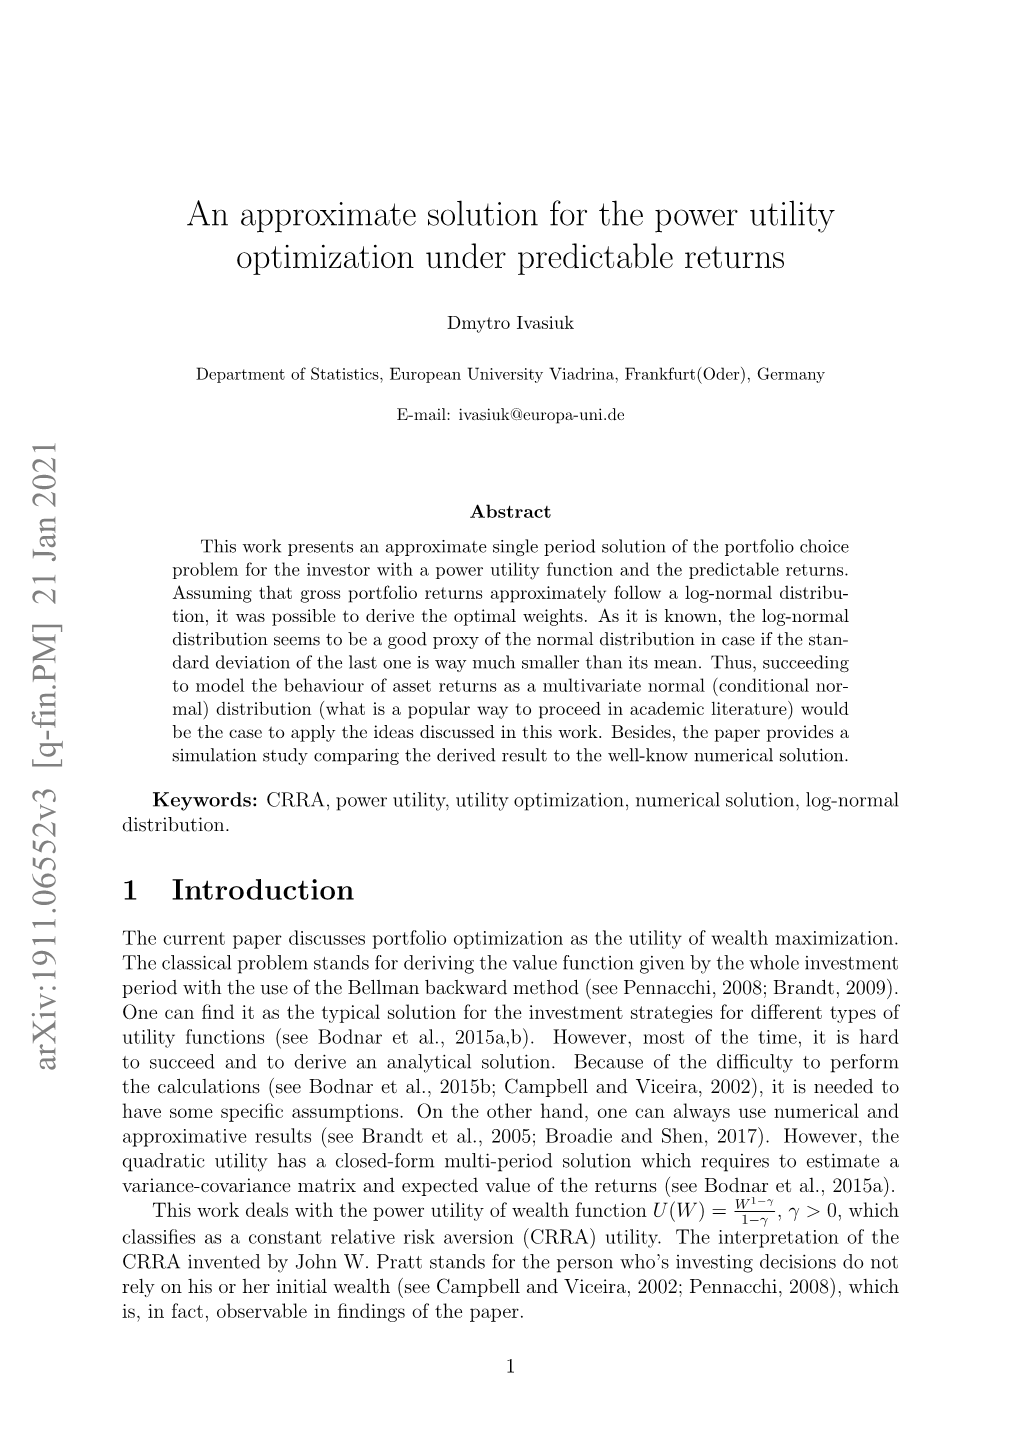 An Approximate Solution for the Power Utility Optimization Under Predictable Returns Arxiv:1911.06552V3 [Q-Fin.PM] 21 Jan 2021